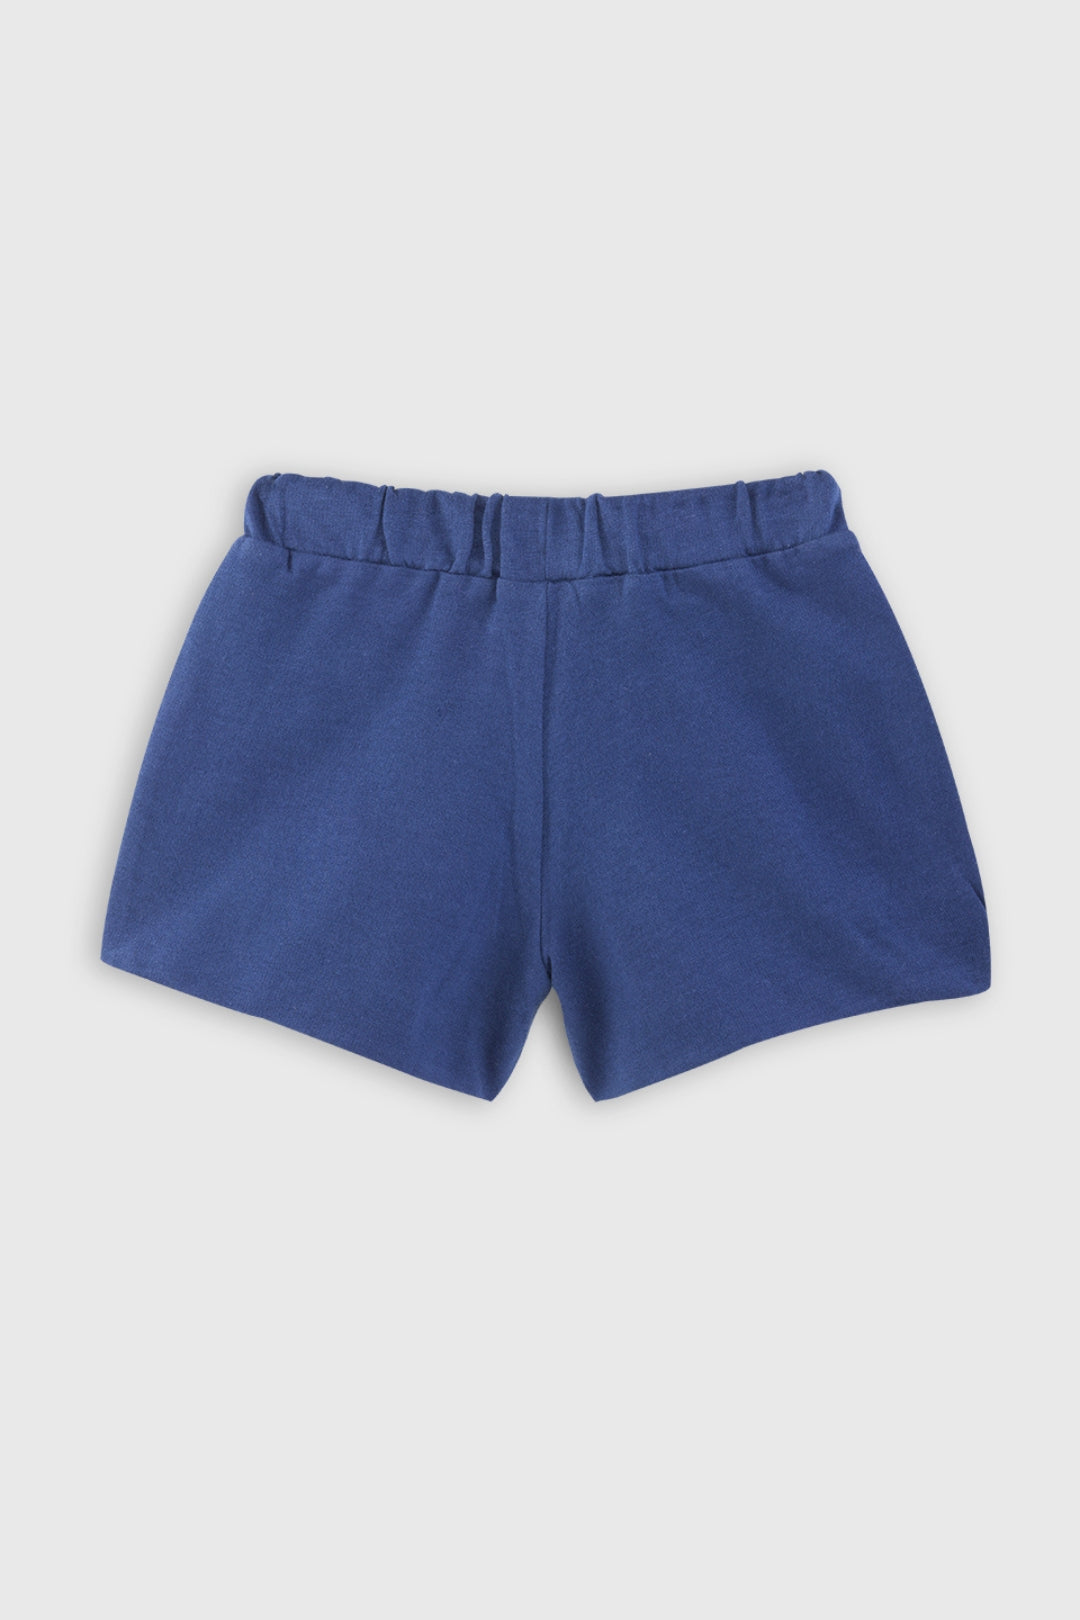 Yellow and Navy  Shorts Pack of 2